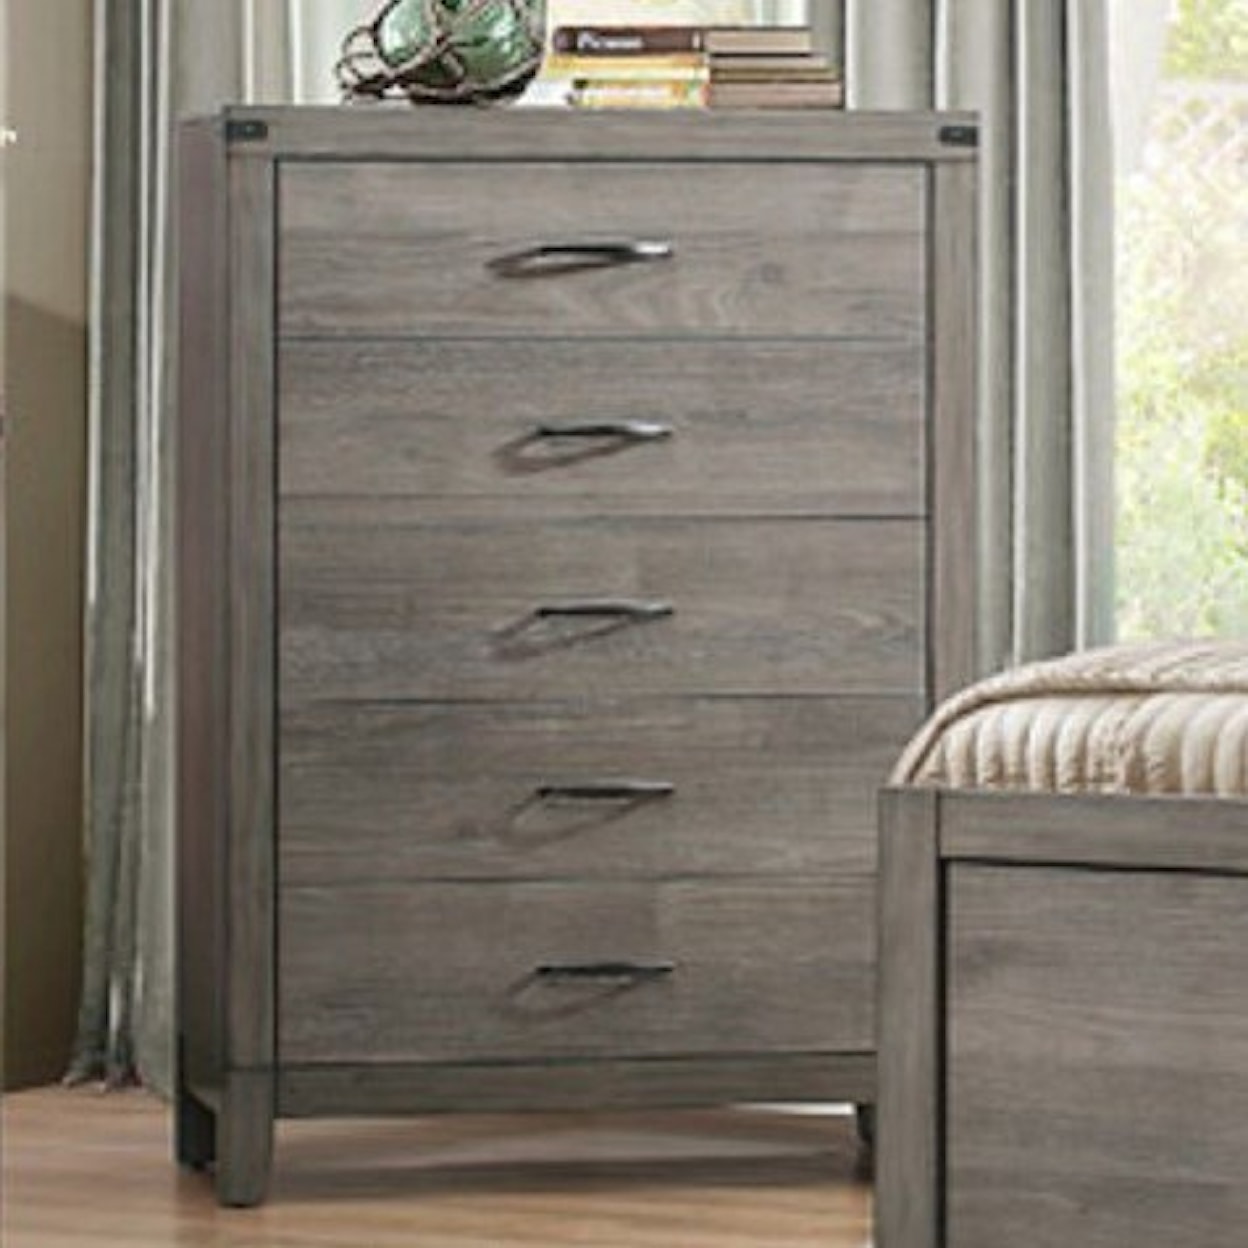 Homelegance Furniture 2042 Contemporary Chest of Drawers